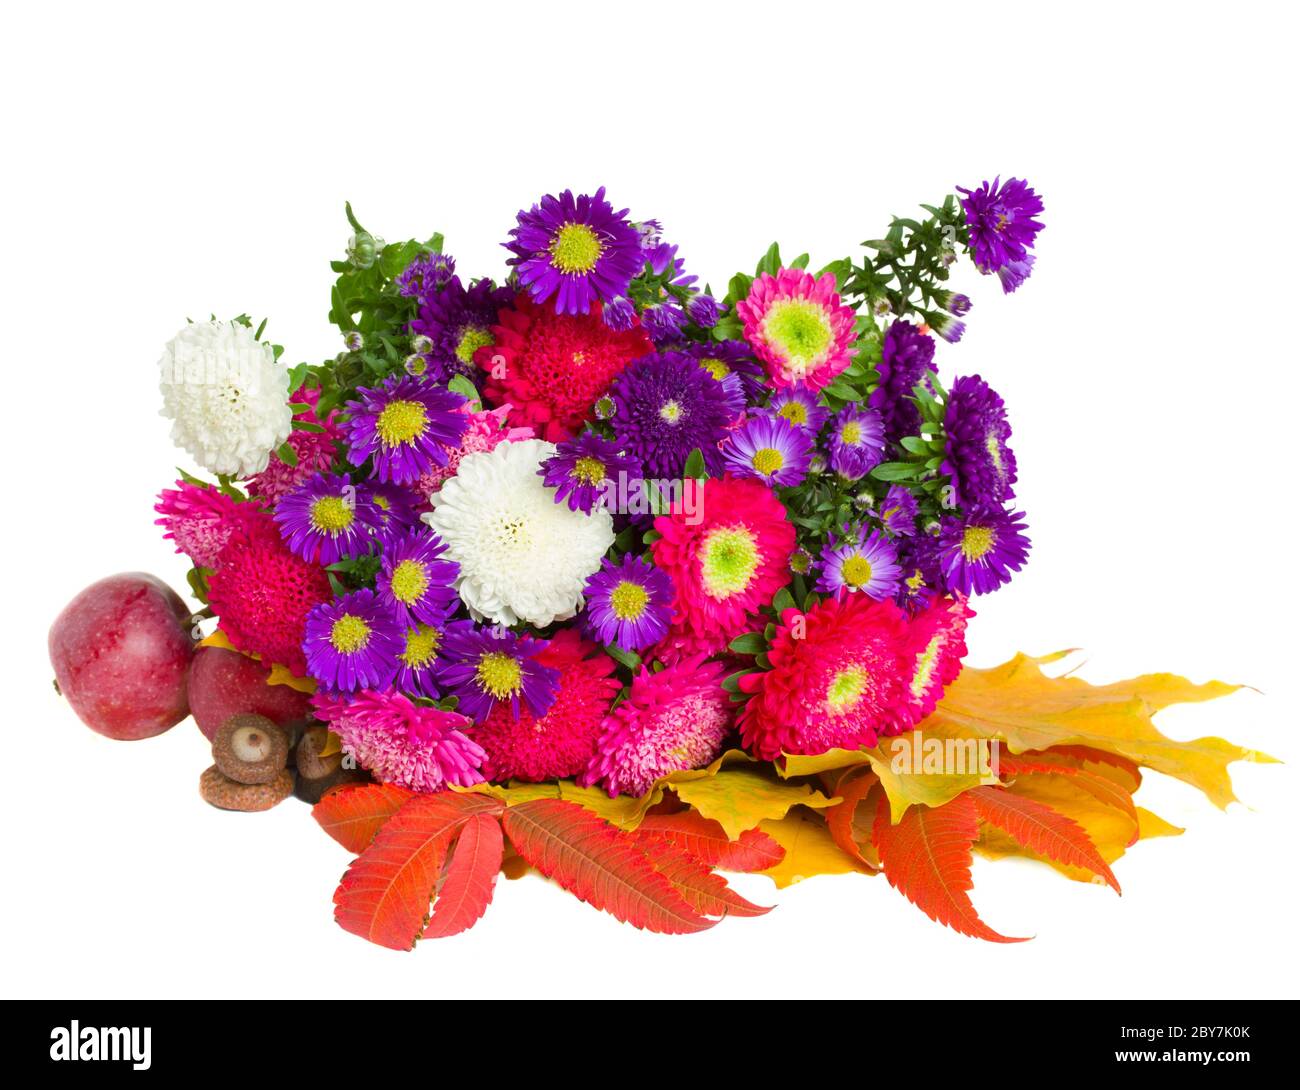 bouquet of aster flowers and leaves Stock Photo